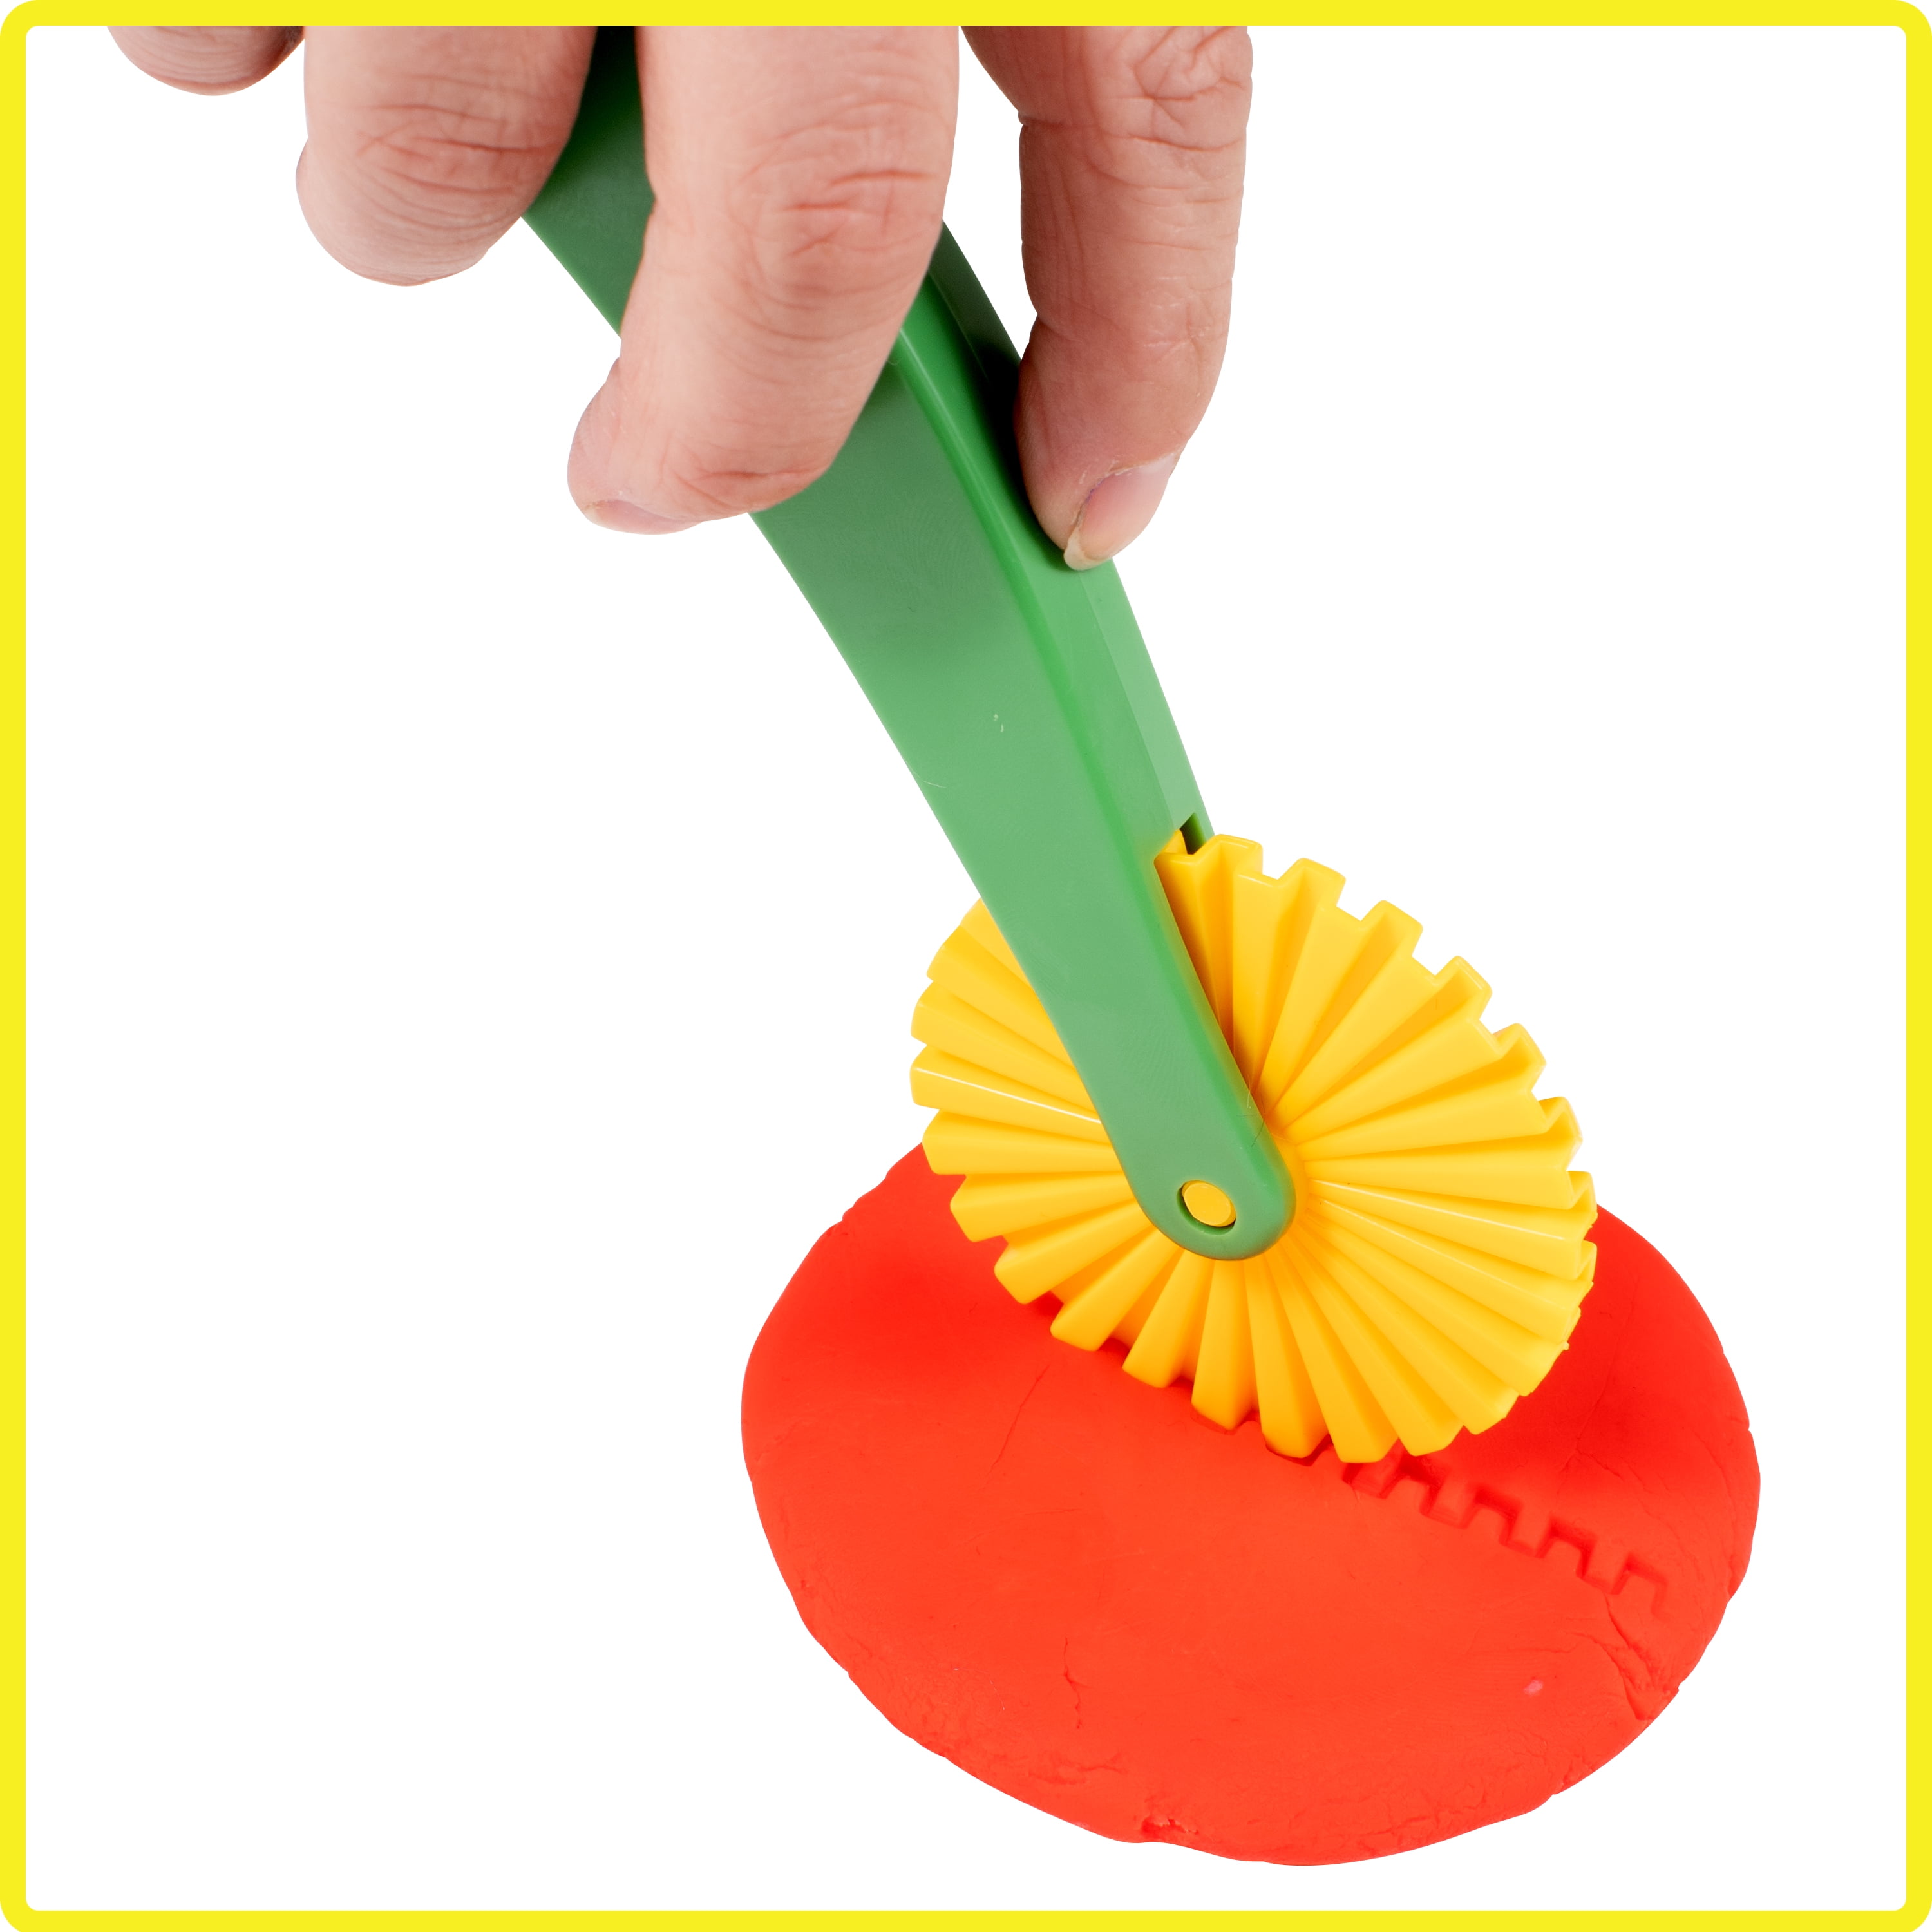 8 Wooden Play Dough Tools Every Autism Home and Classroom Need - Special  Learning House